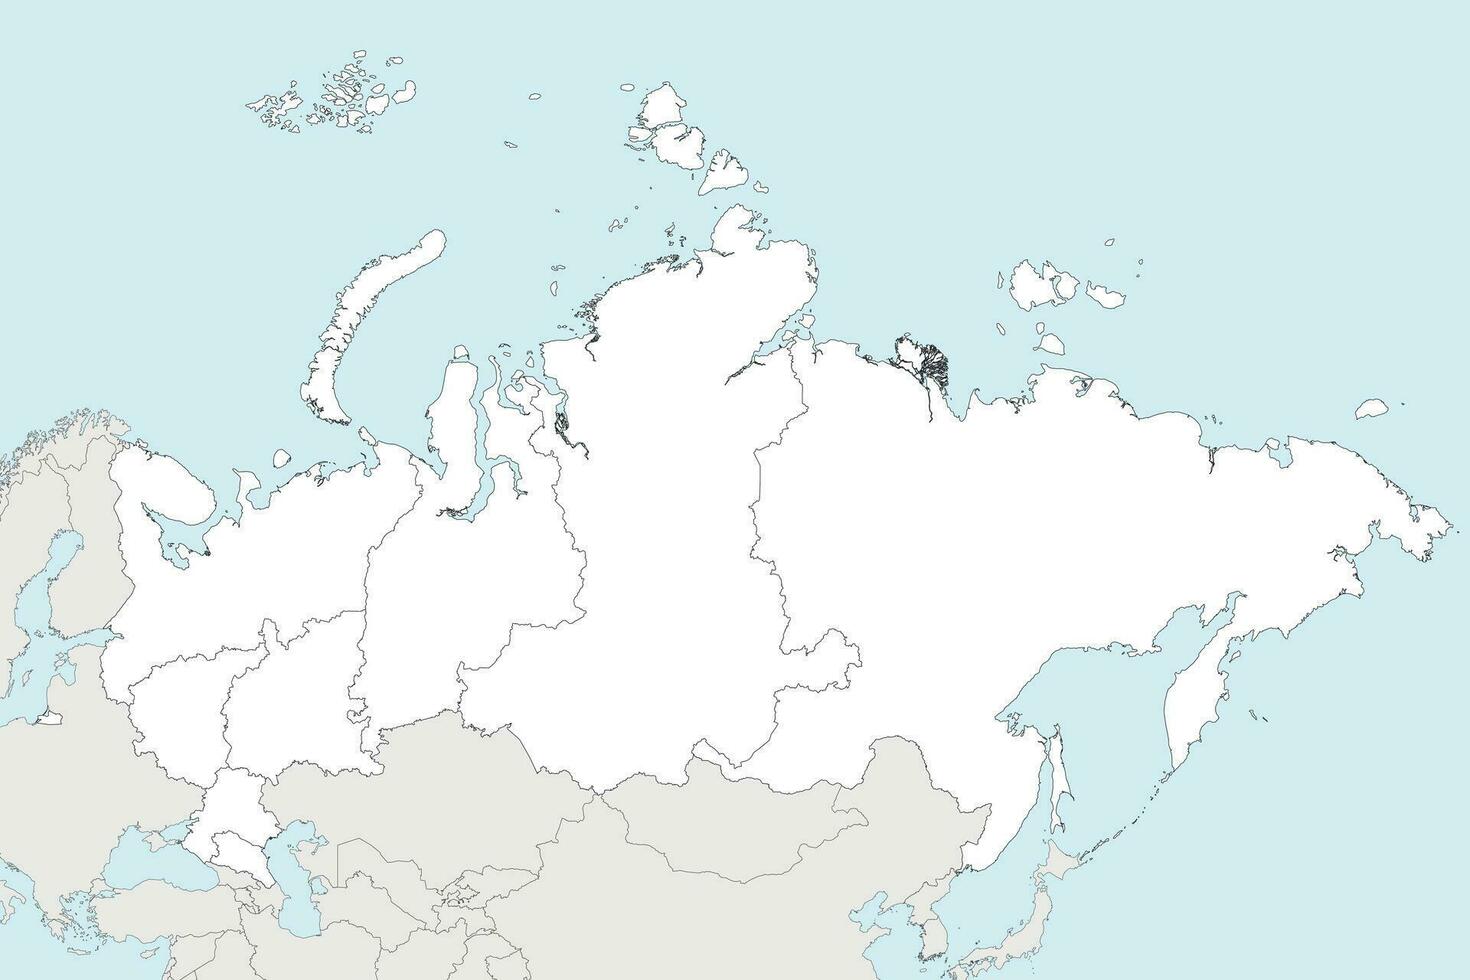 Vector blank map of Russia with regions or federal districts and administrative divisions, and neighbouring countries. Editable and clearly labeled layers.